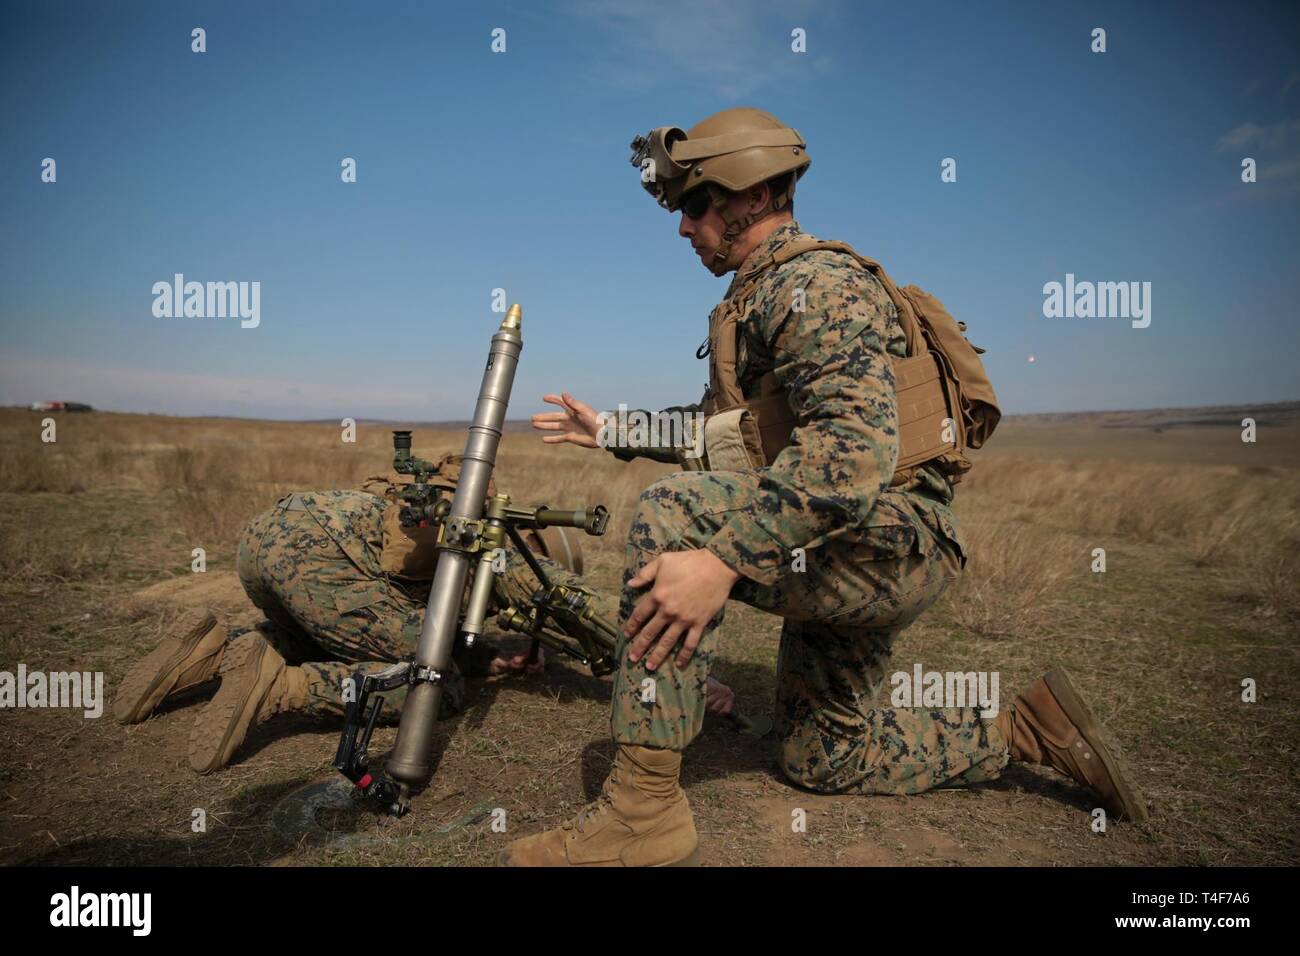 U.S. Marines with Special Purpose Marine Air-Ground Task Force-Crisis Response-Africa 19.1, Marine Forces Europe and Africa, fire the 60 mm mortar system during the final exercise portion of Platinum Eagle 19.1, a multilateral training exercise held at Babadag Training Area, Romania, March 20, 2019. SPMAGTF-CR-AF is deployed to conduct crisis-response and theater-security operations in Africa and promote regional stability by conducting military-to-military training exercises throughout Europe and Africa. Stock Photo